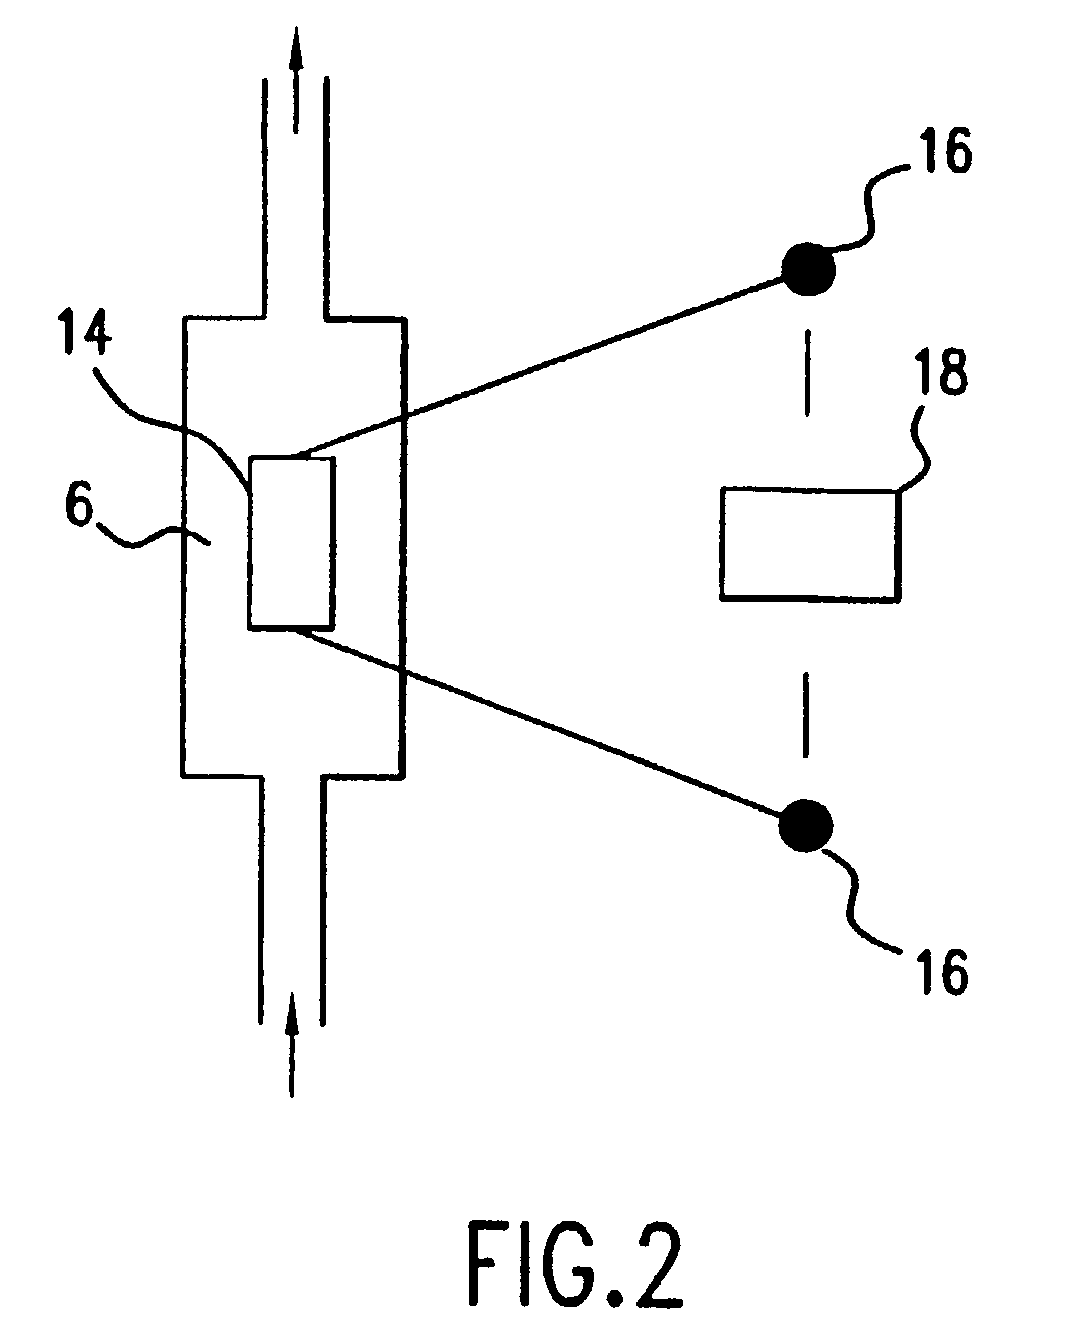 Method of determining the nucleotide sequence of oligonucleotides and DNA molecules